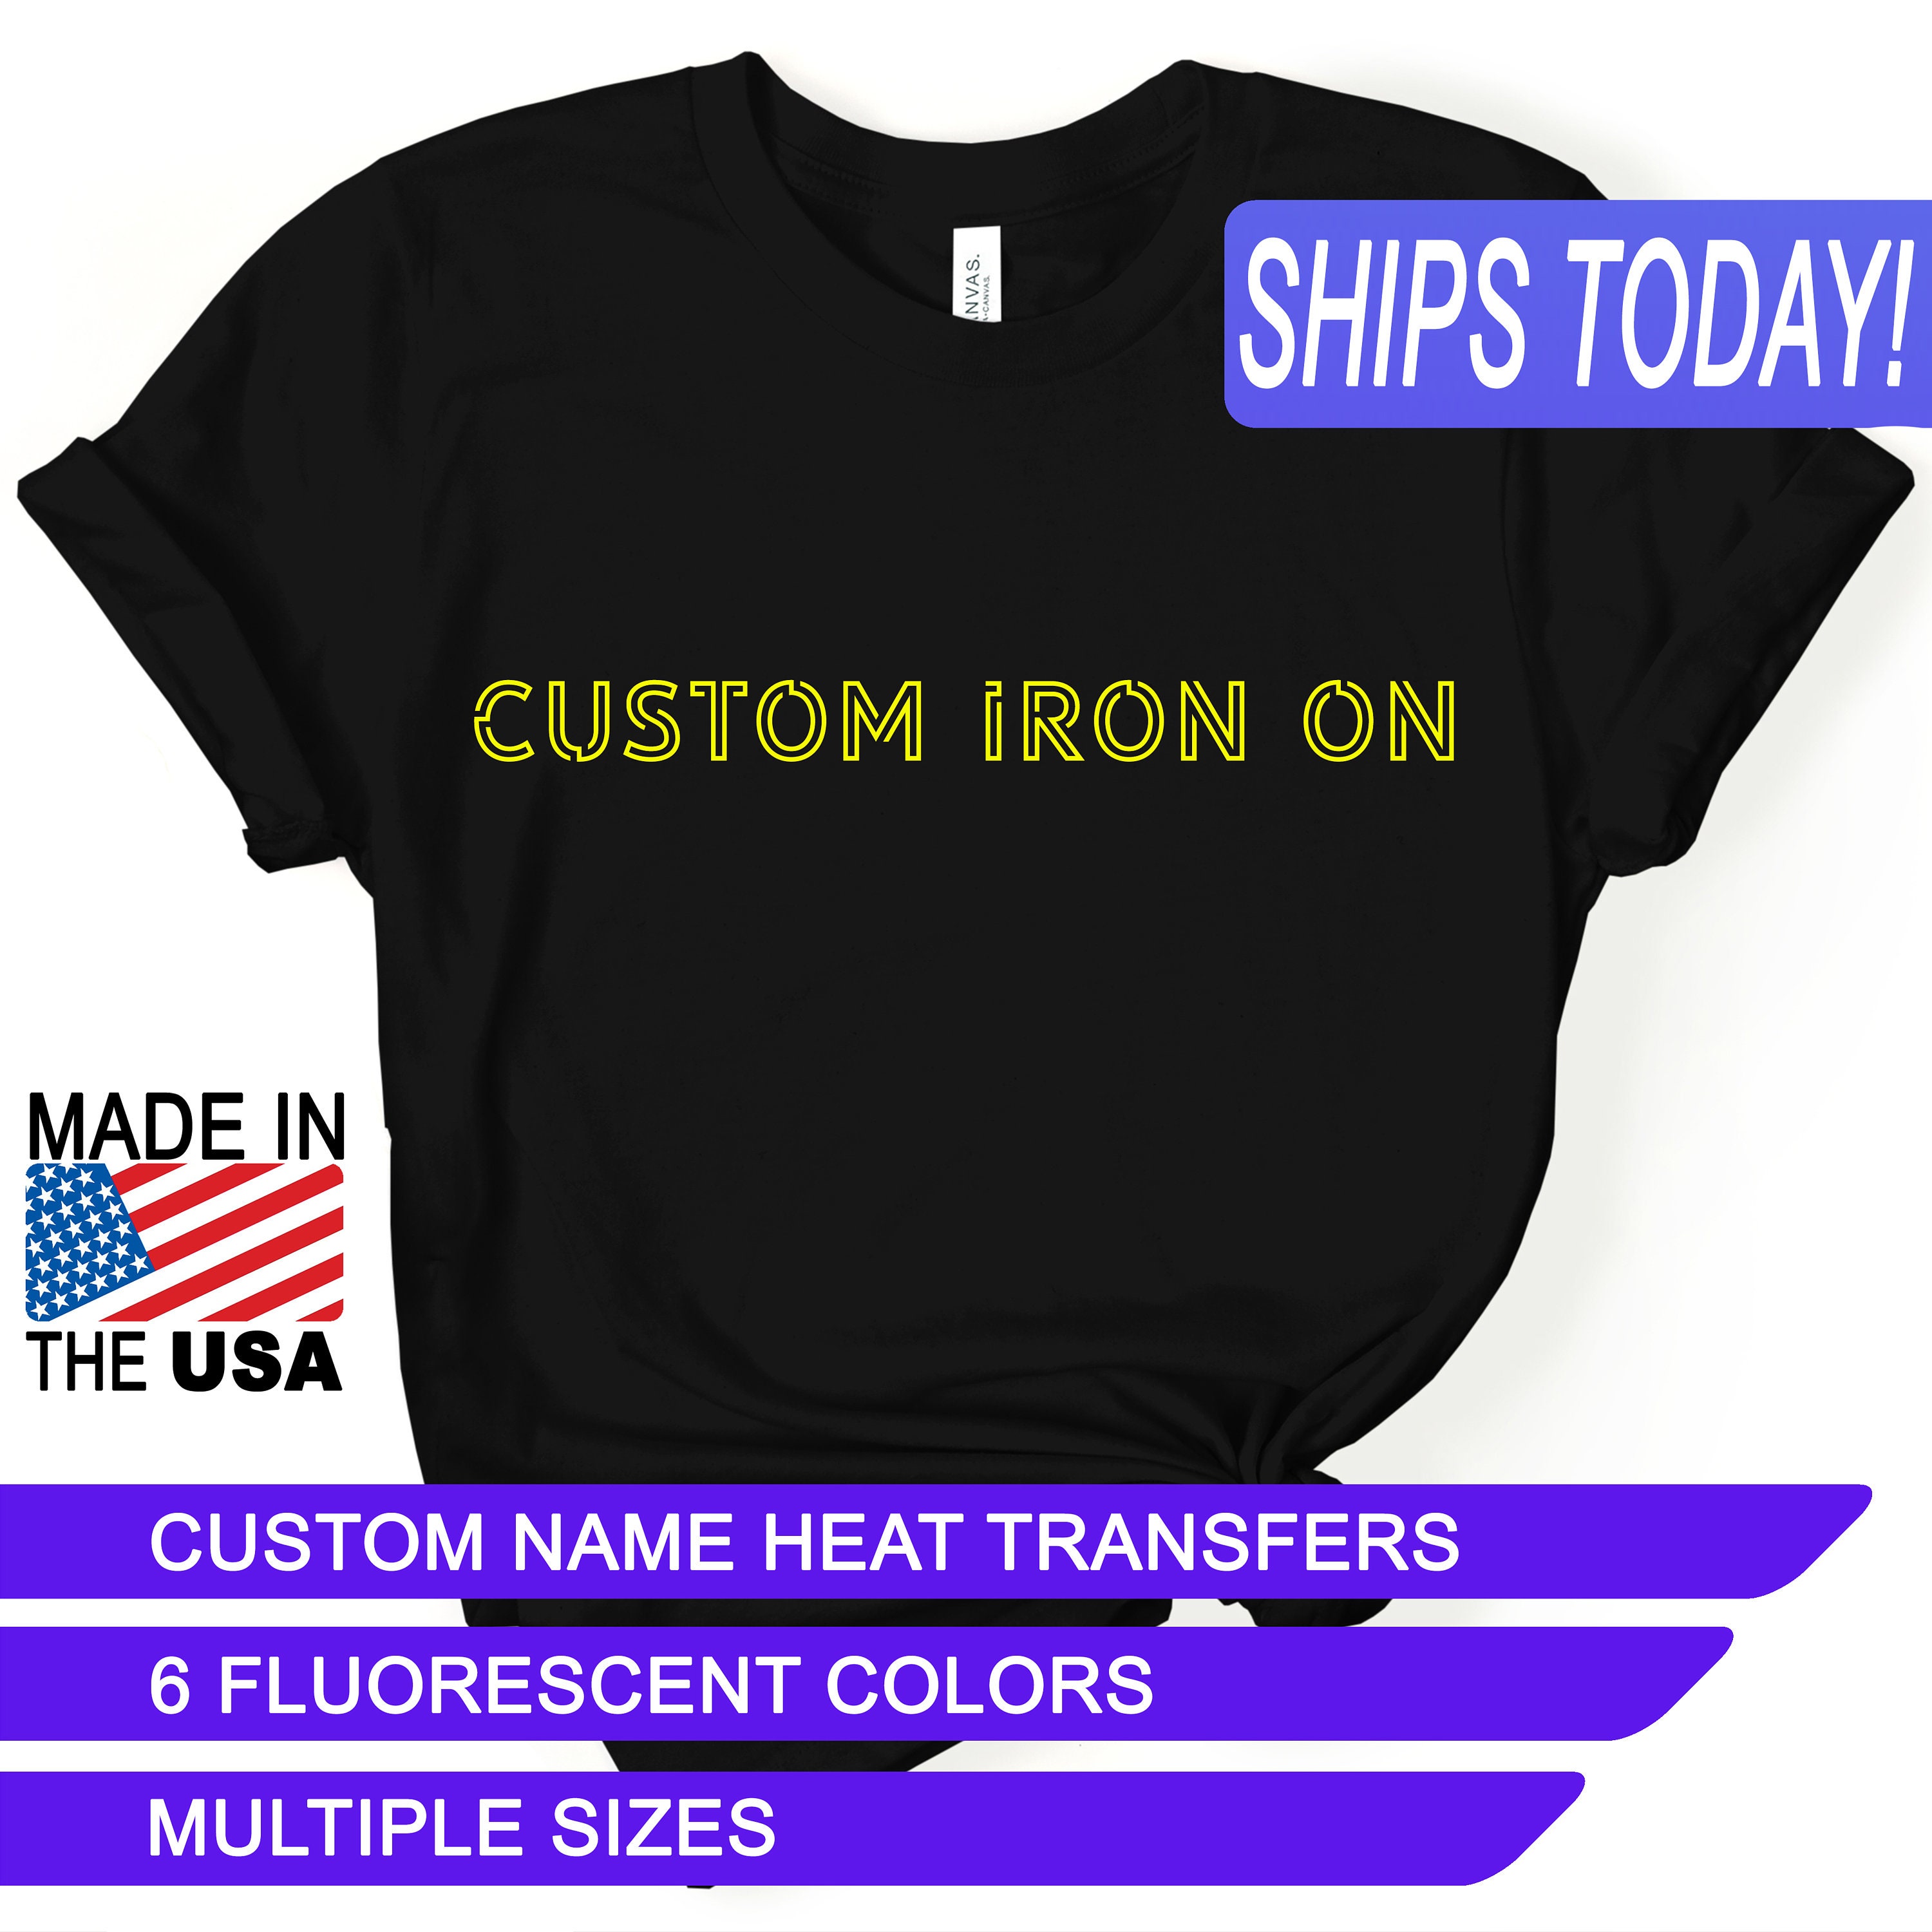 Fluorescent Yellow, Custom Heat Transfers, Personalized Name Iron Ons,  CPSIA Certified Child Safe, Use on Cotton, Polyester, and Leather 